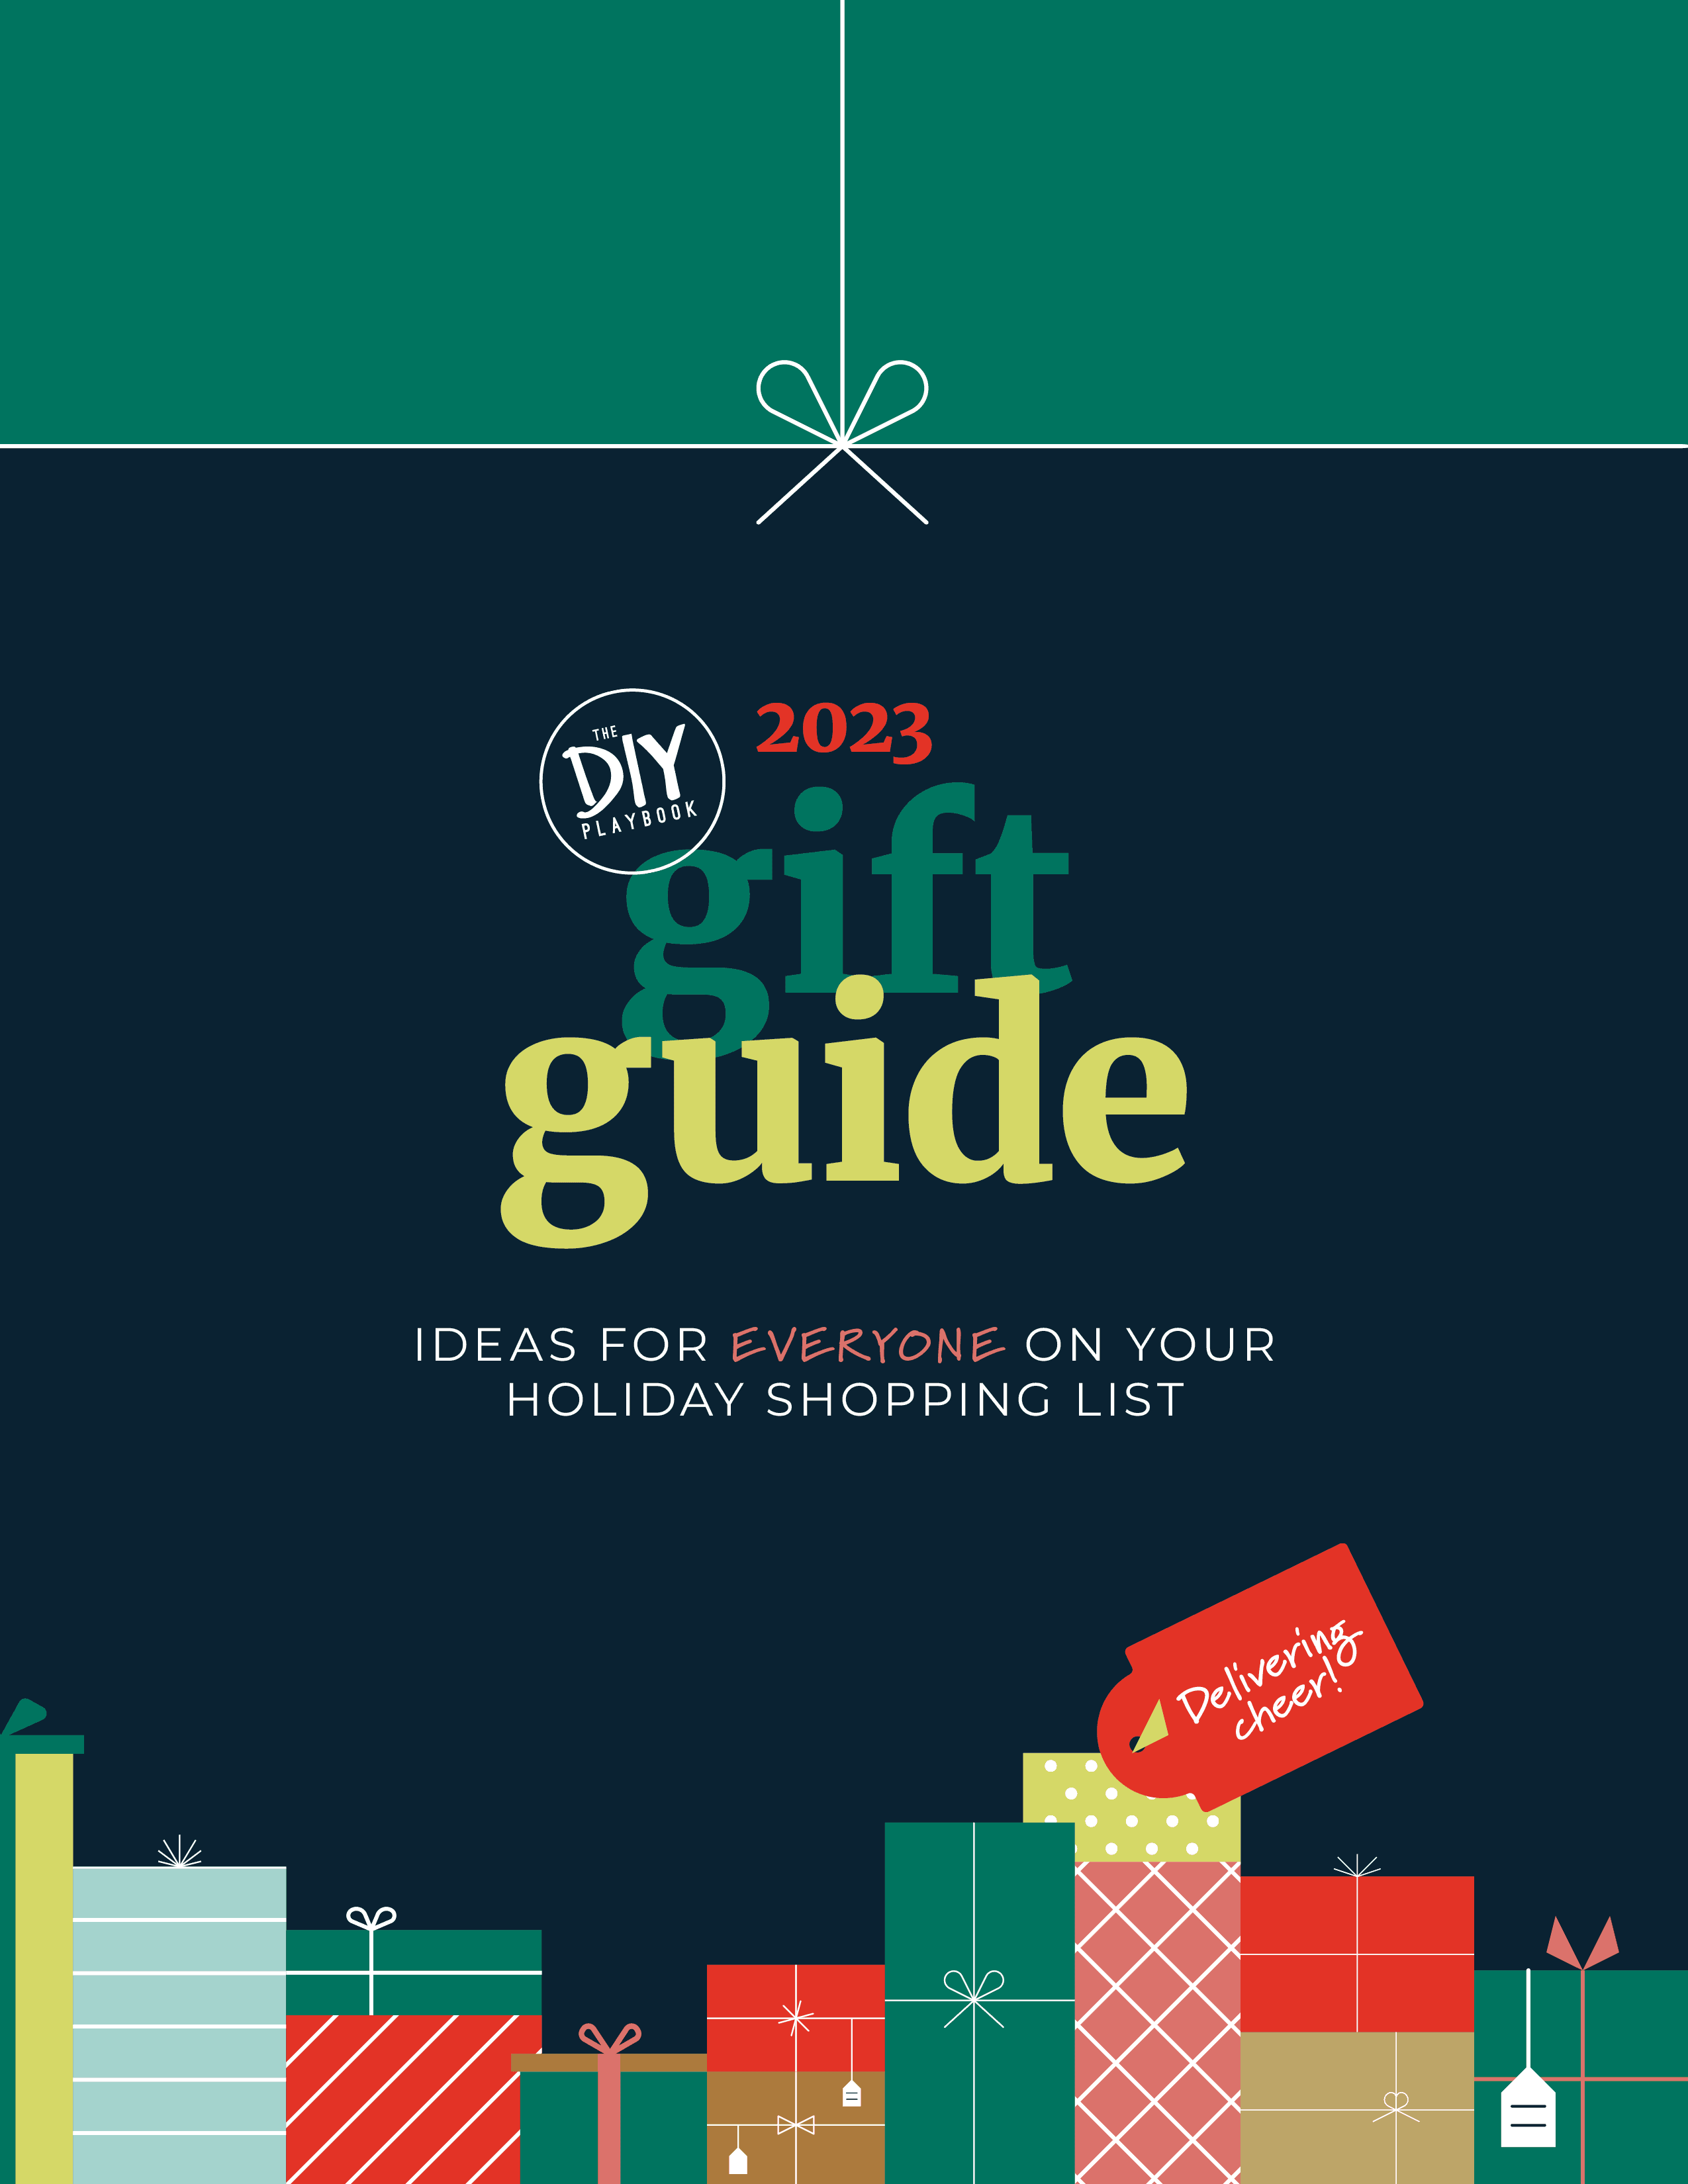 My 2023 holiday gift guide